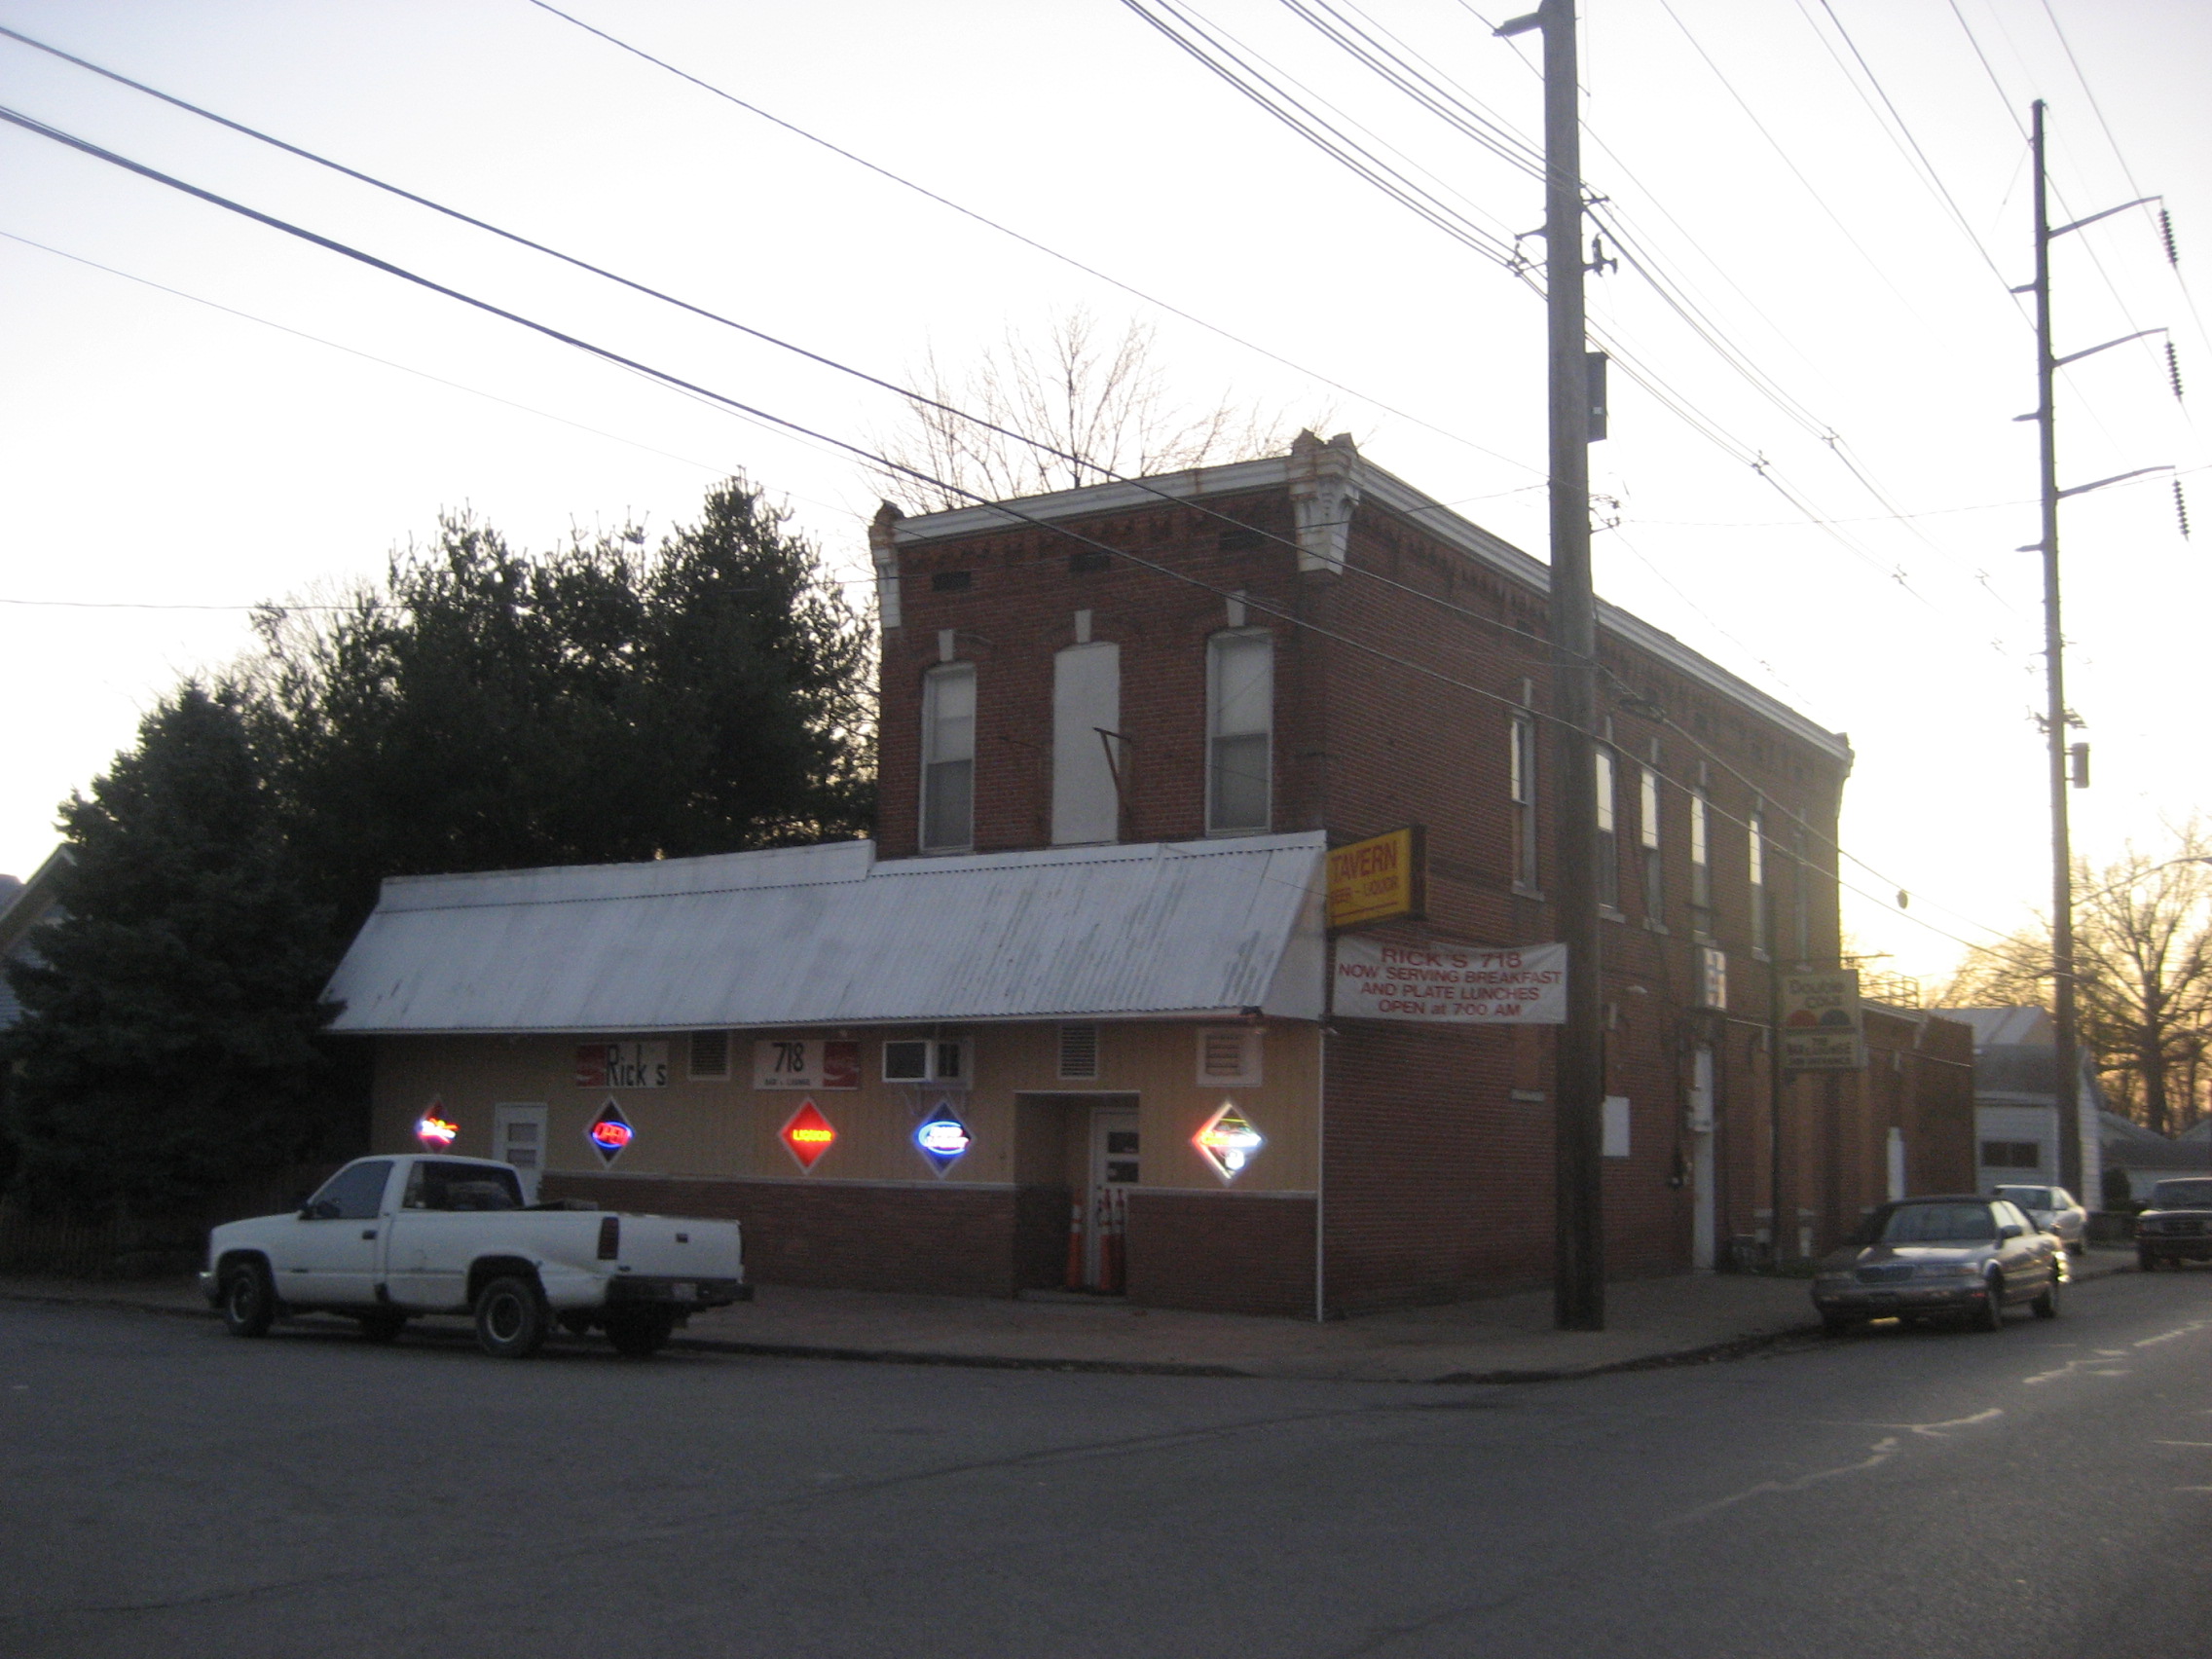 Keil Grocery and Saloon